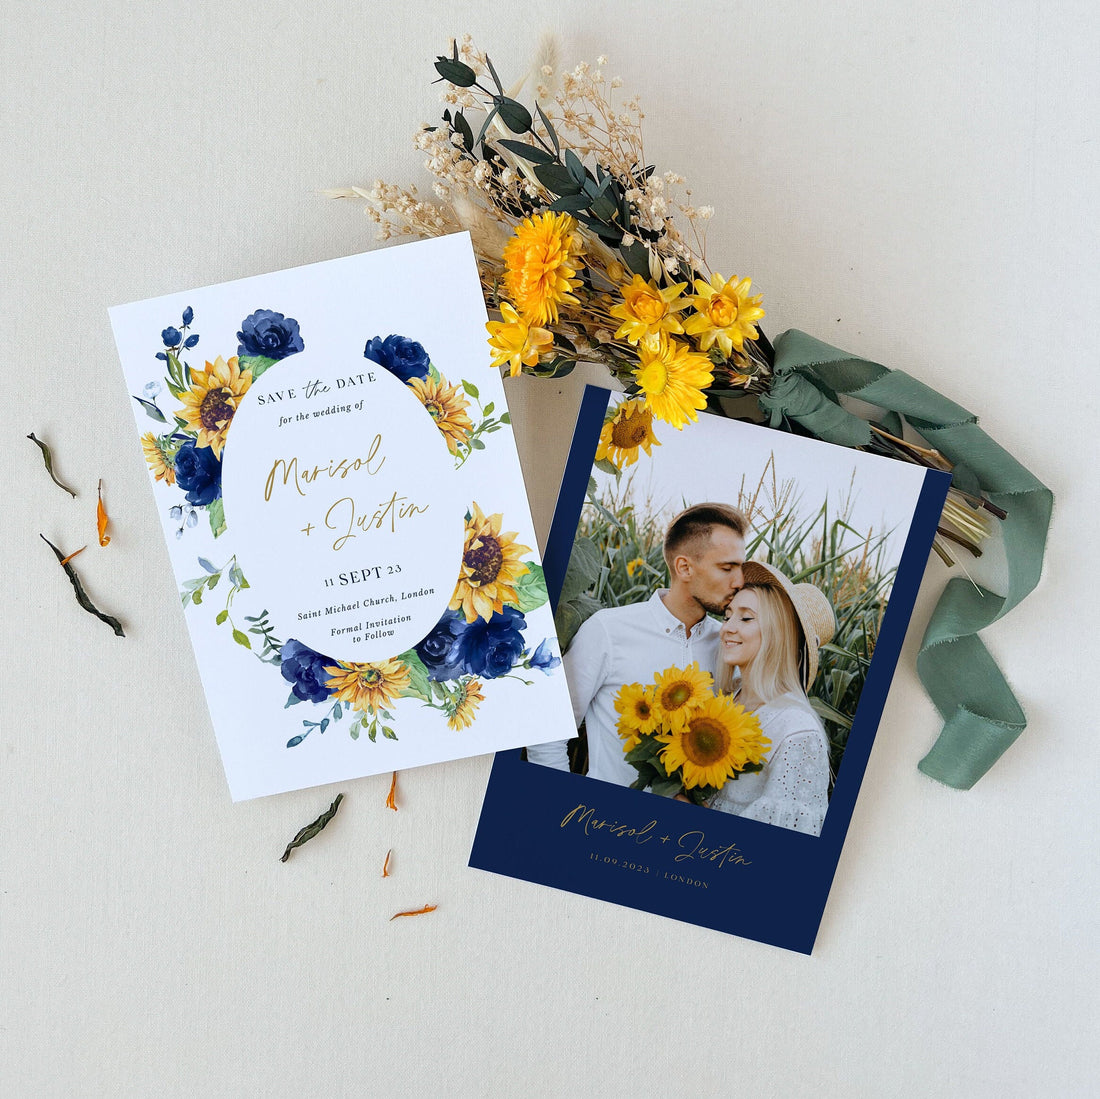 IVY Rustic Sunflower Save the Date Template